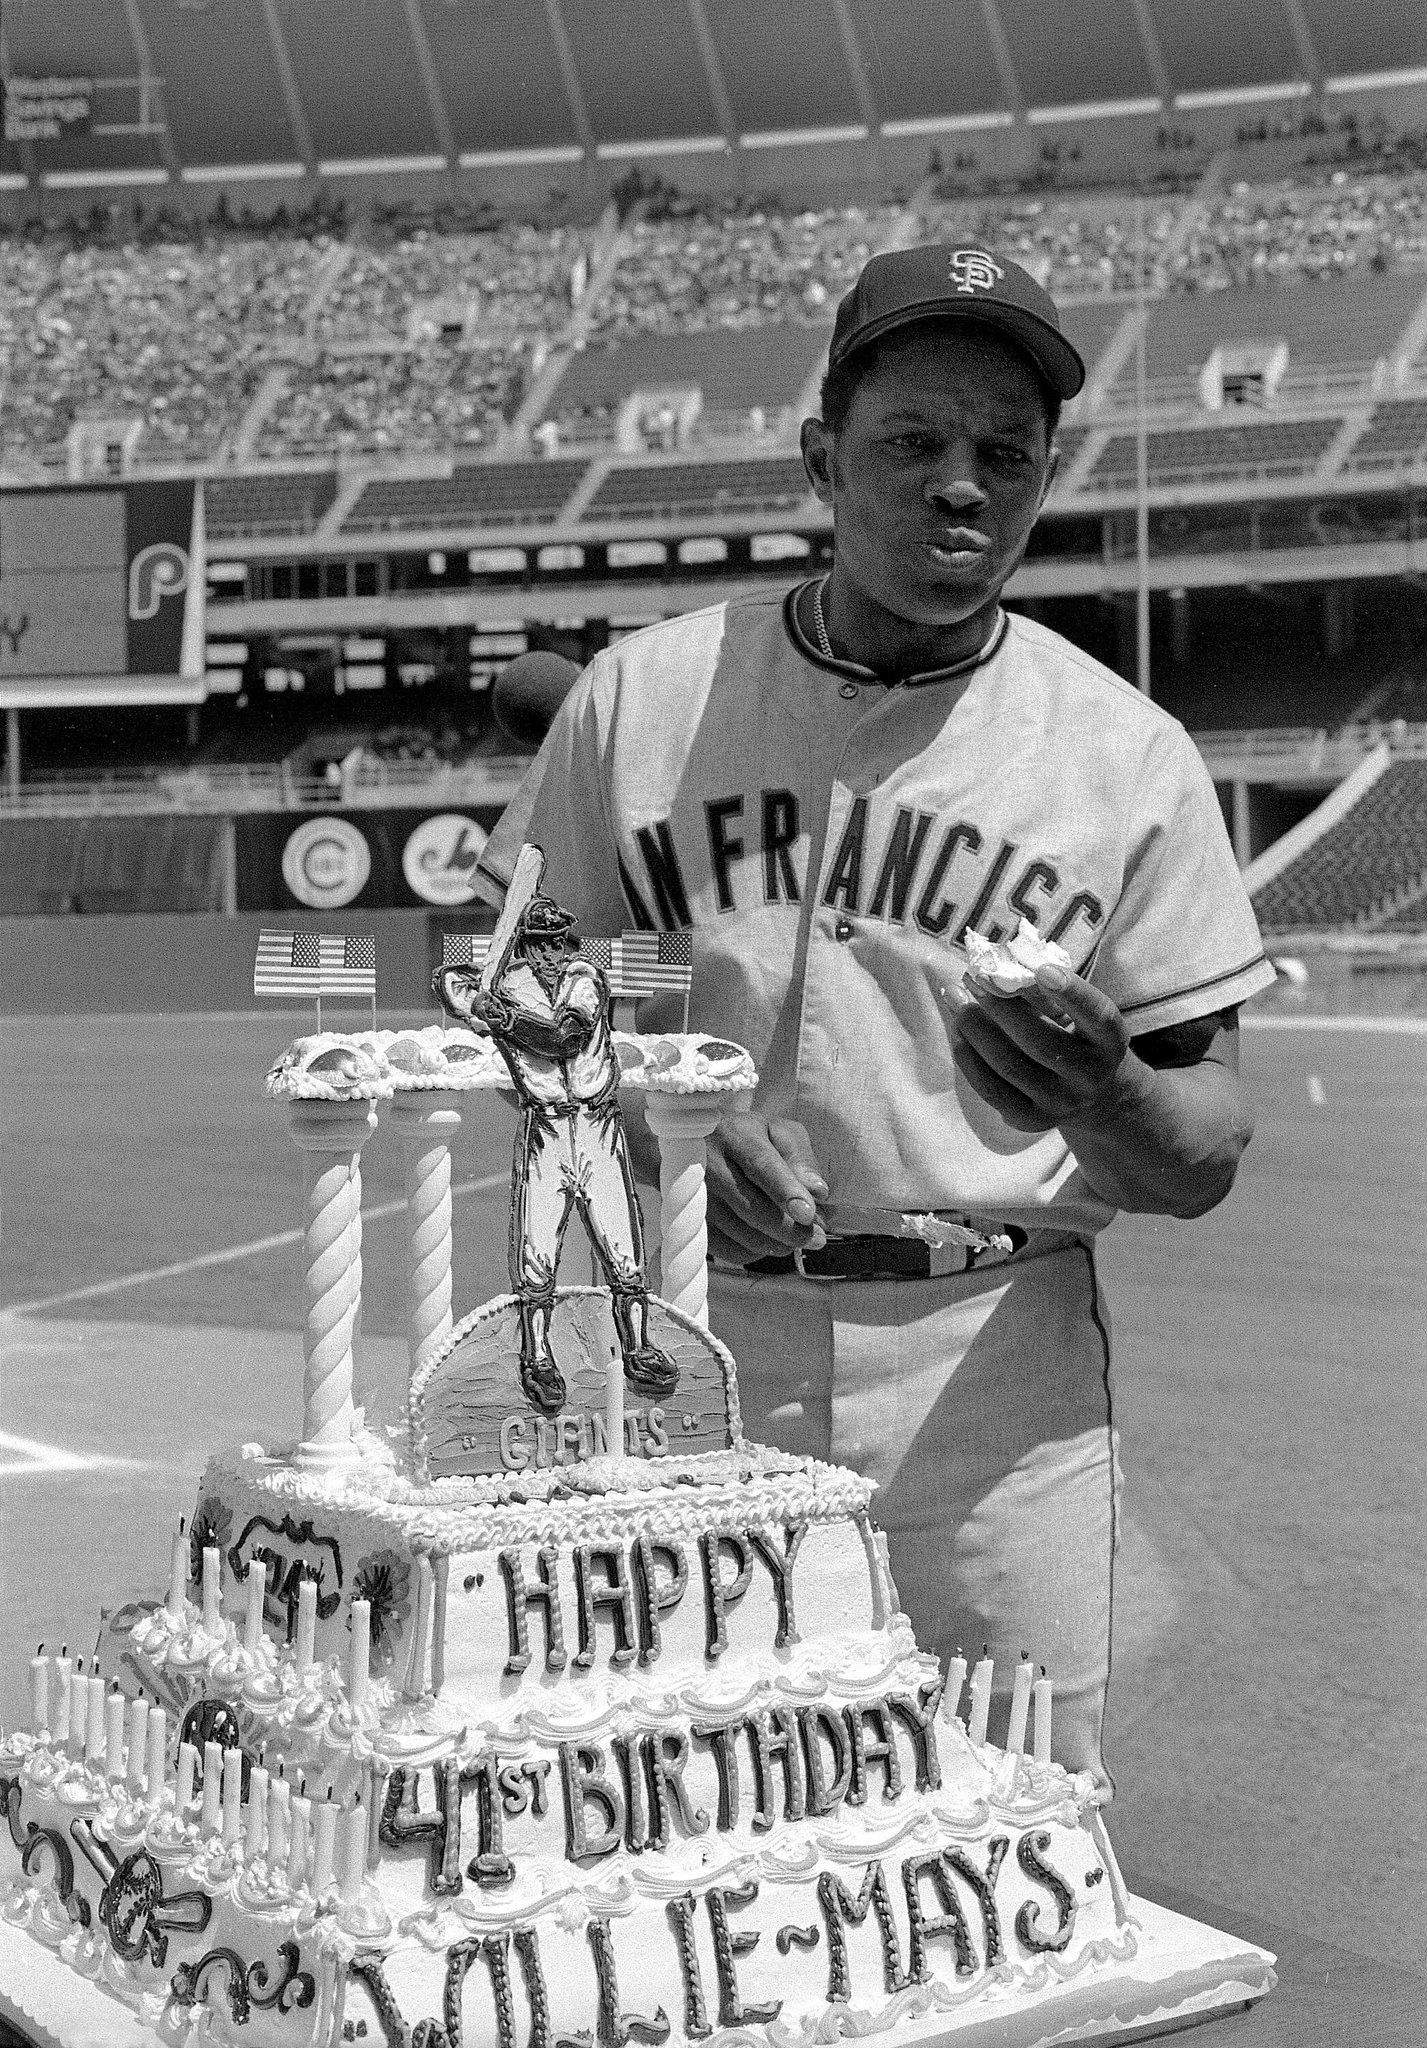 An icon turns 91 today. 

Happy birthday, Willie Mays. 